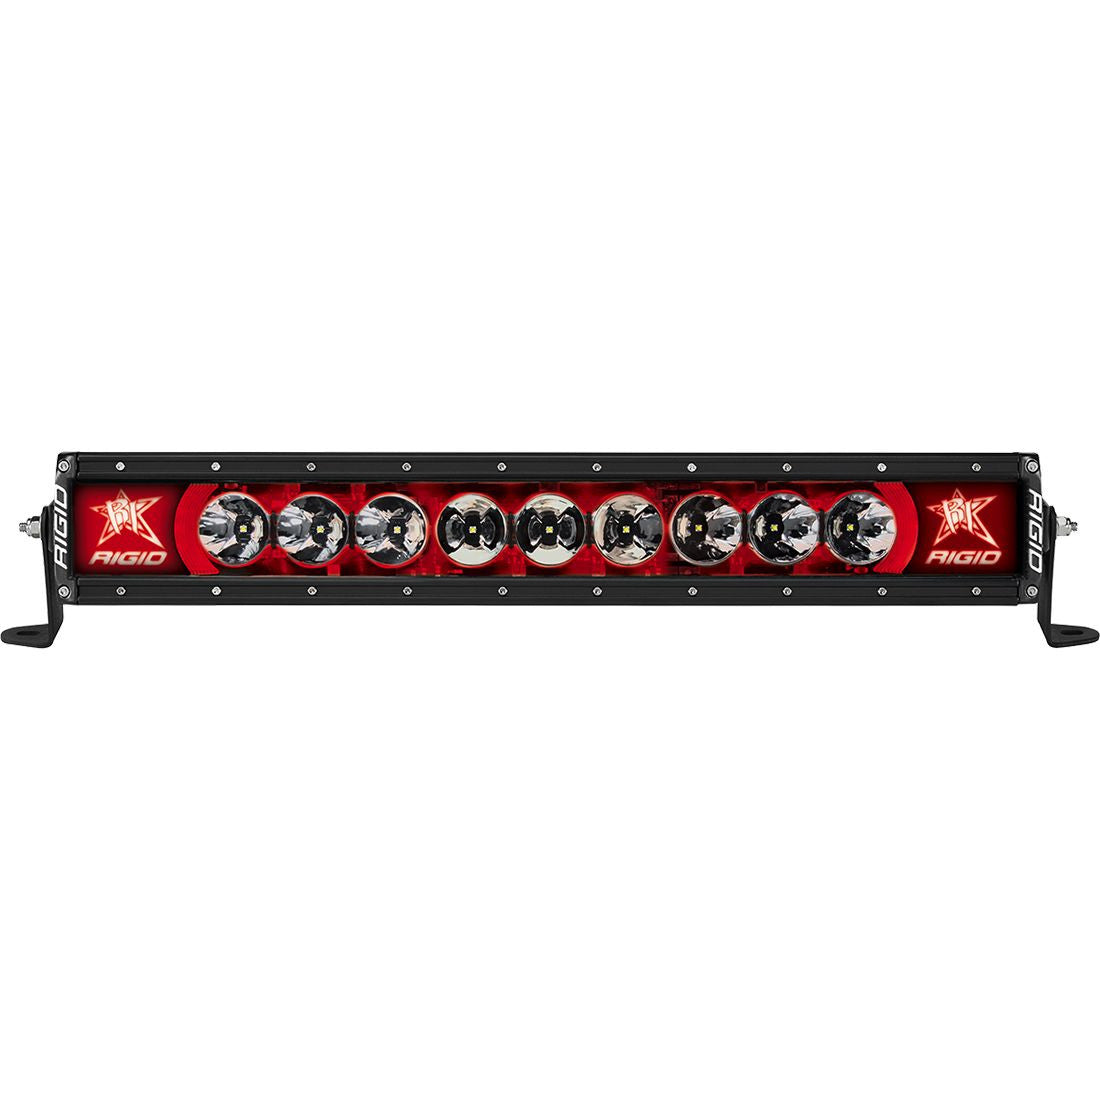 RIGID Industries Radiance Plus LED Light Bar, Broad-Spot Optic, 20 Inch With Red Backlight